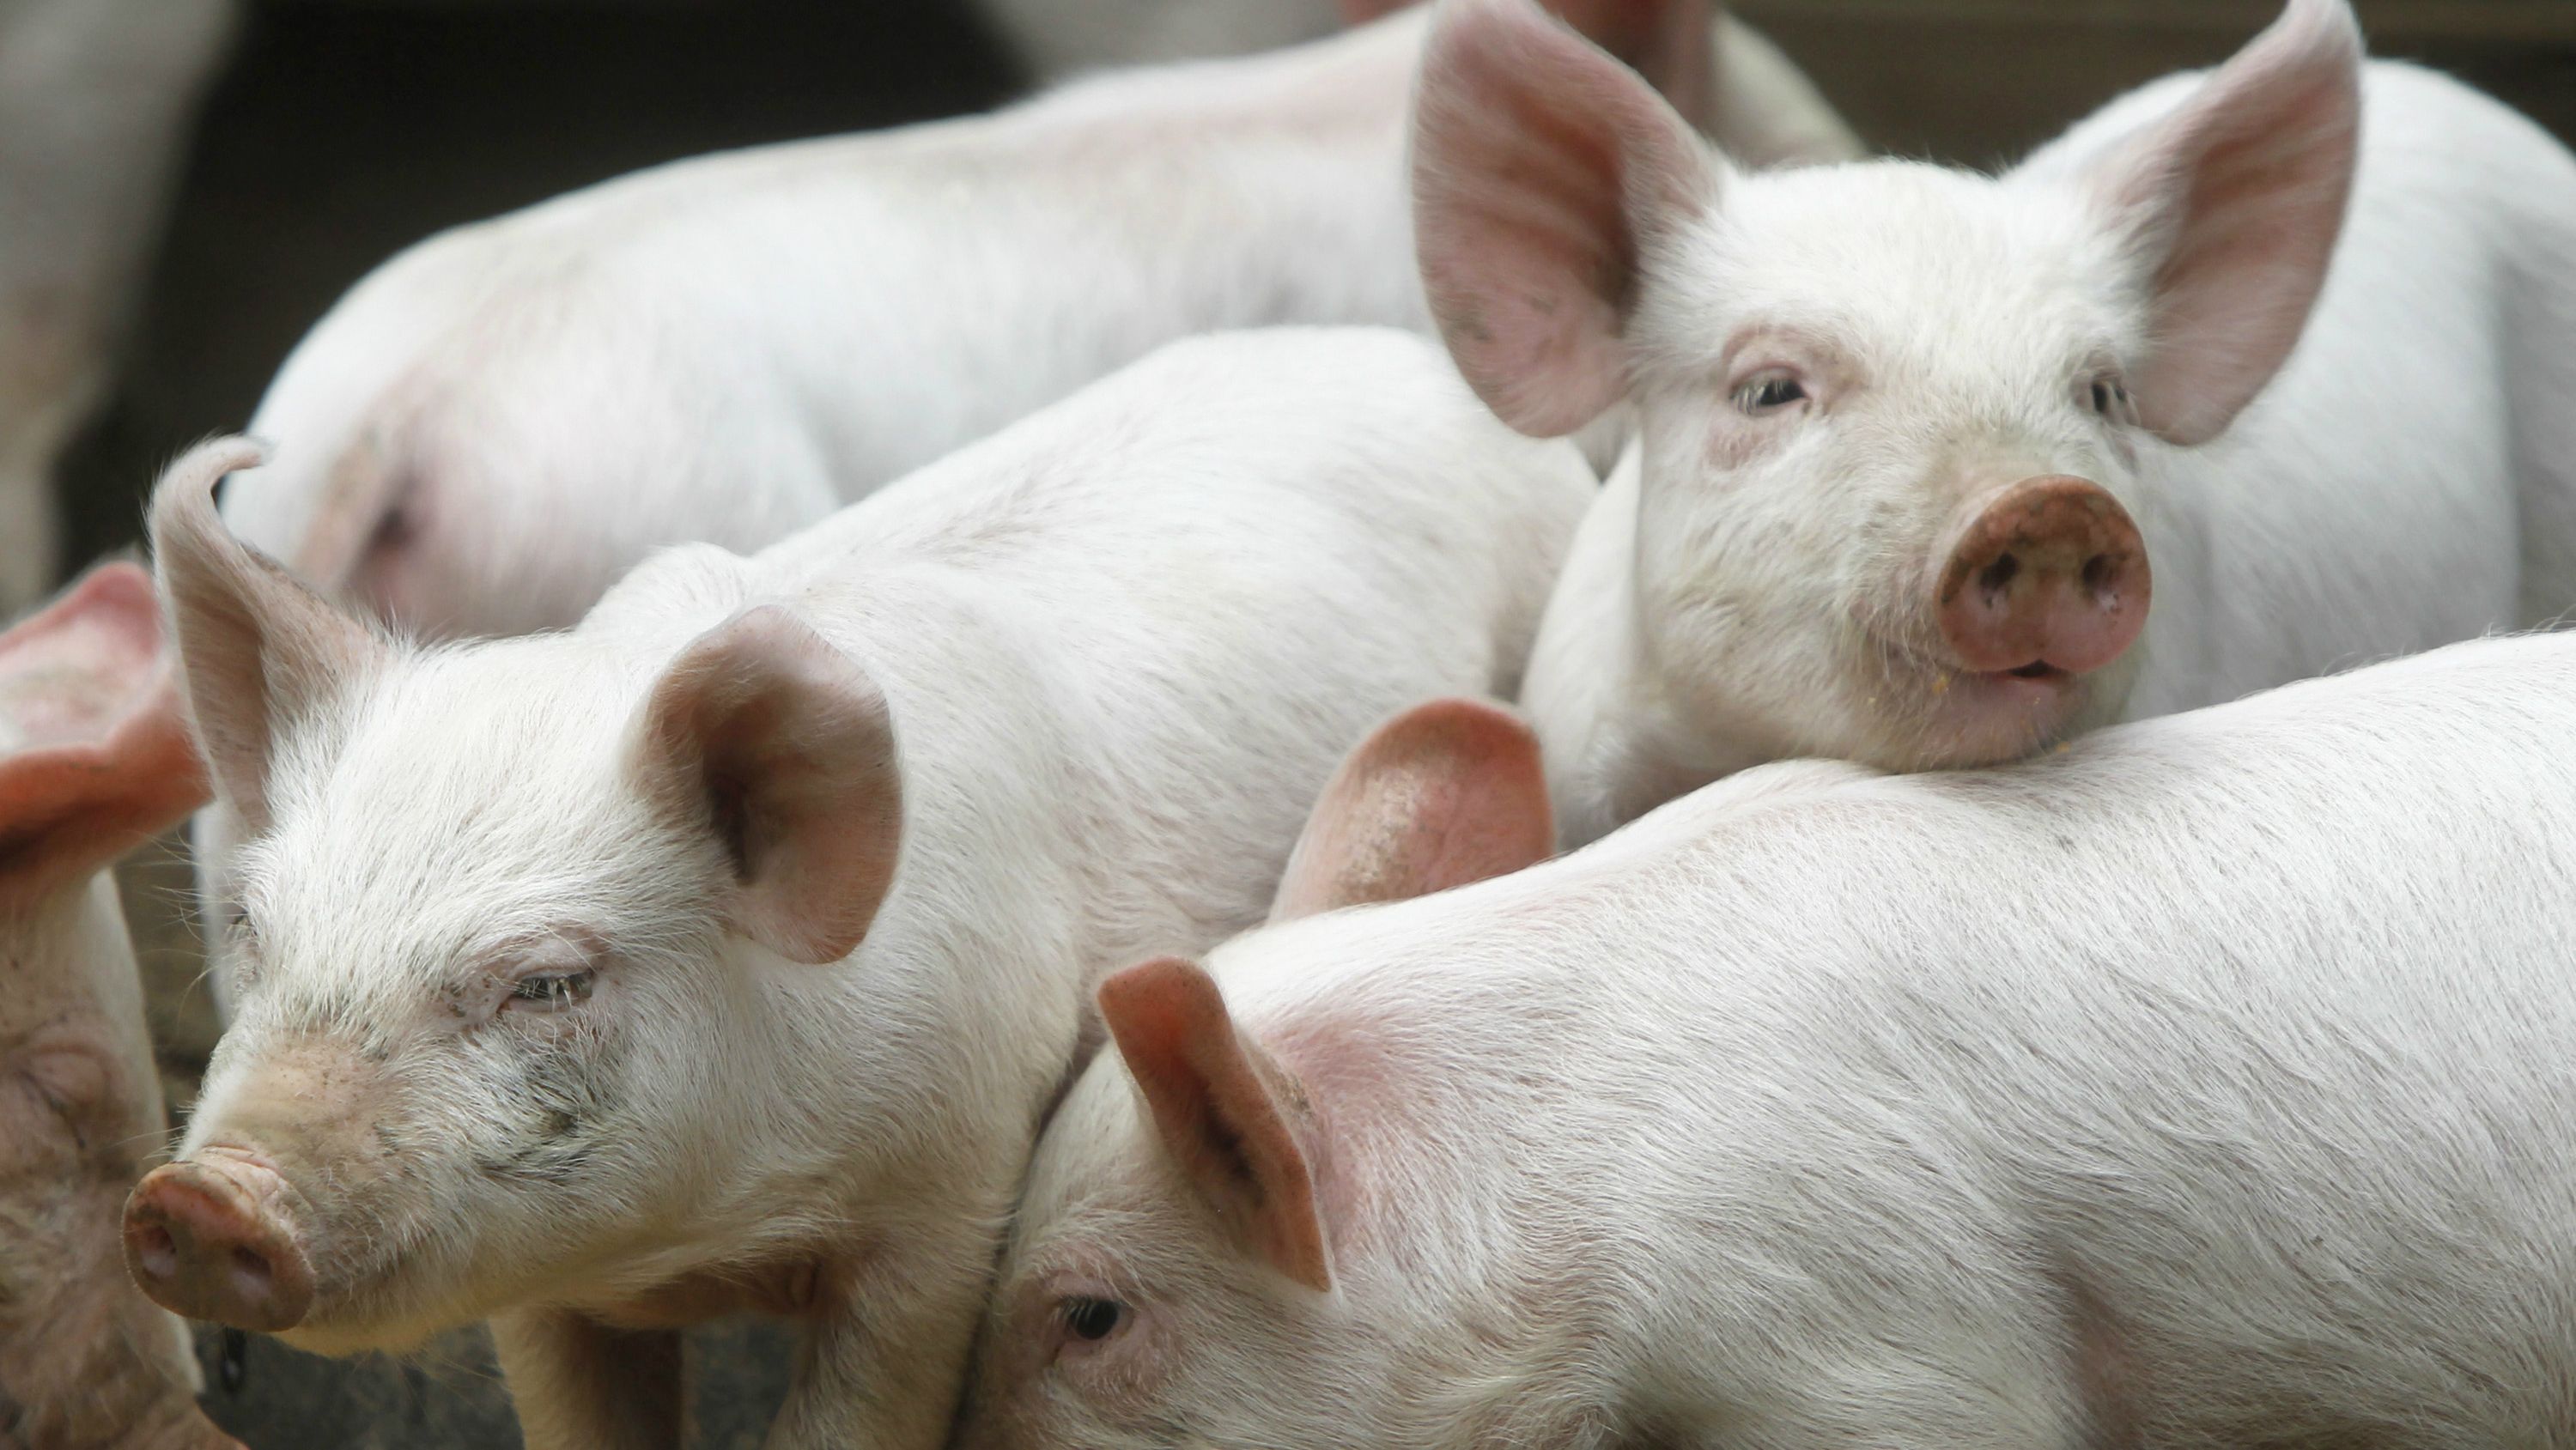 Highly Infectious Swine Disease Found at OYE - OK Pork Council Advises on Limiting Spread of PED